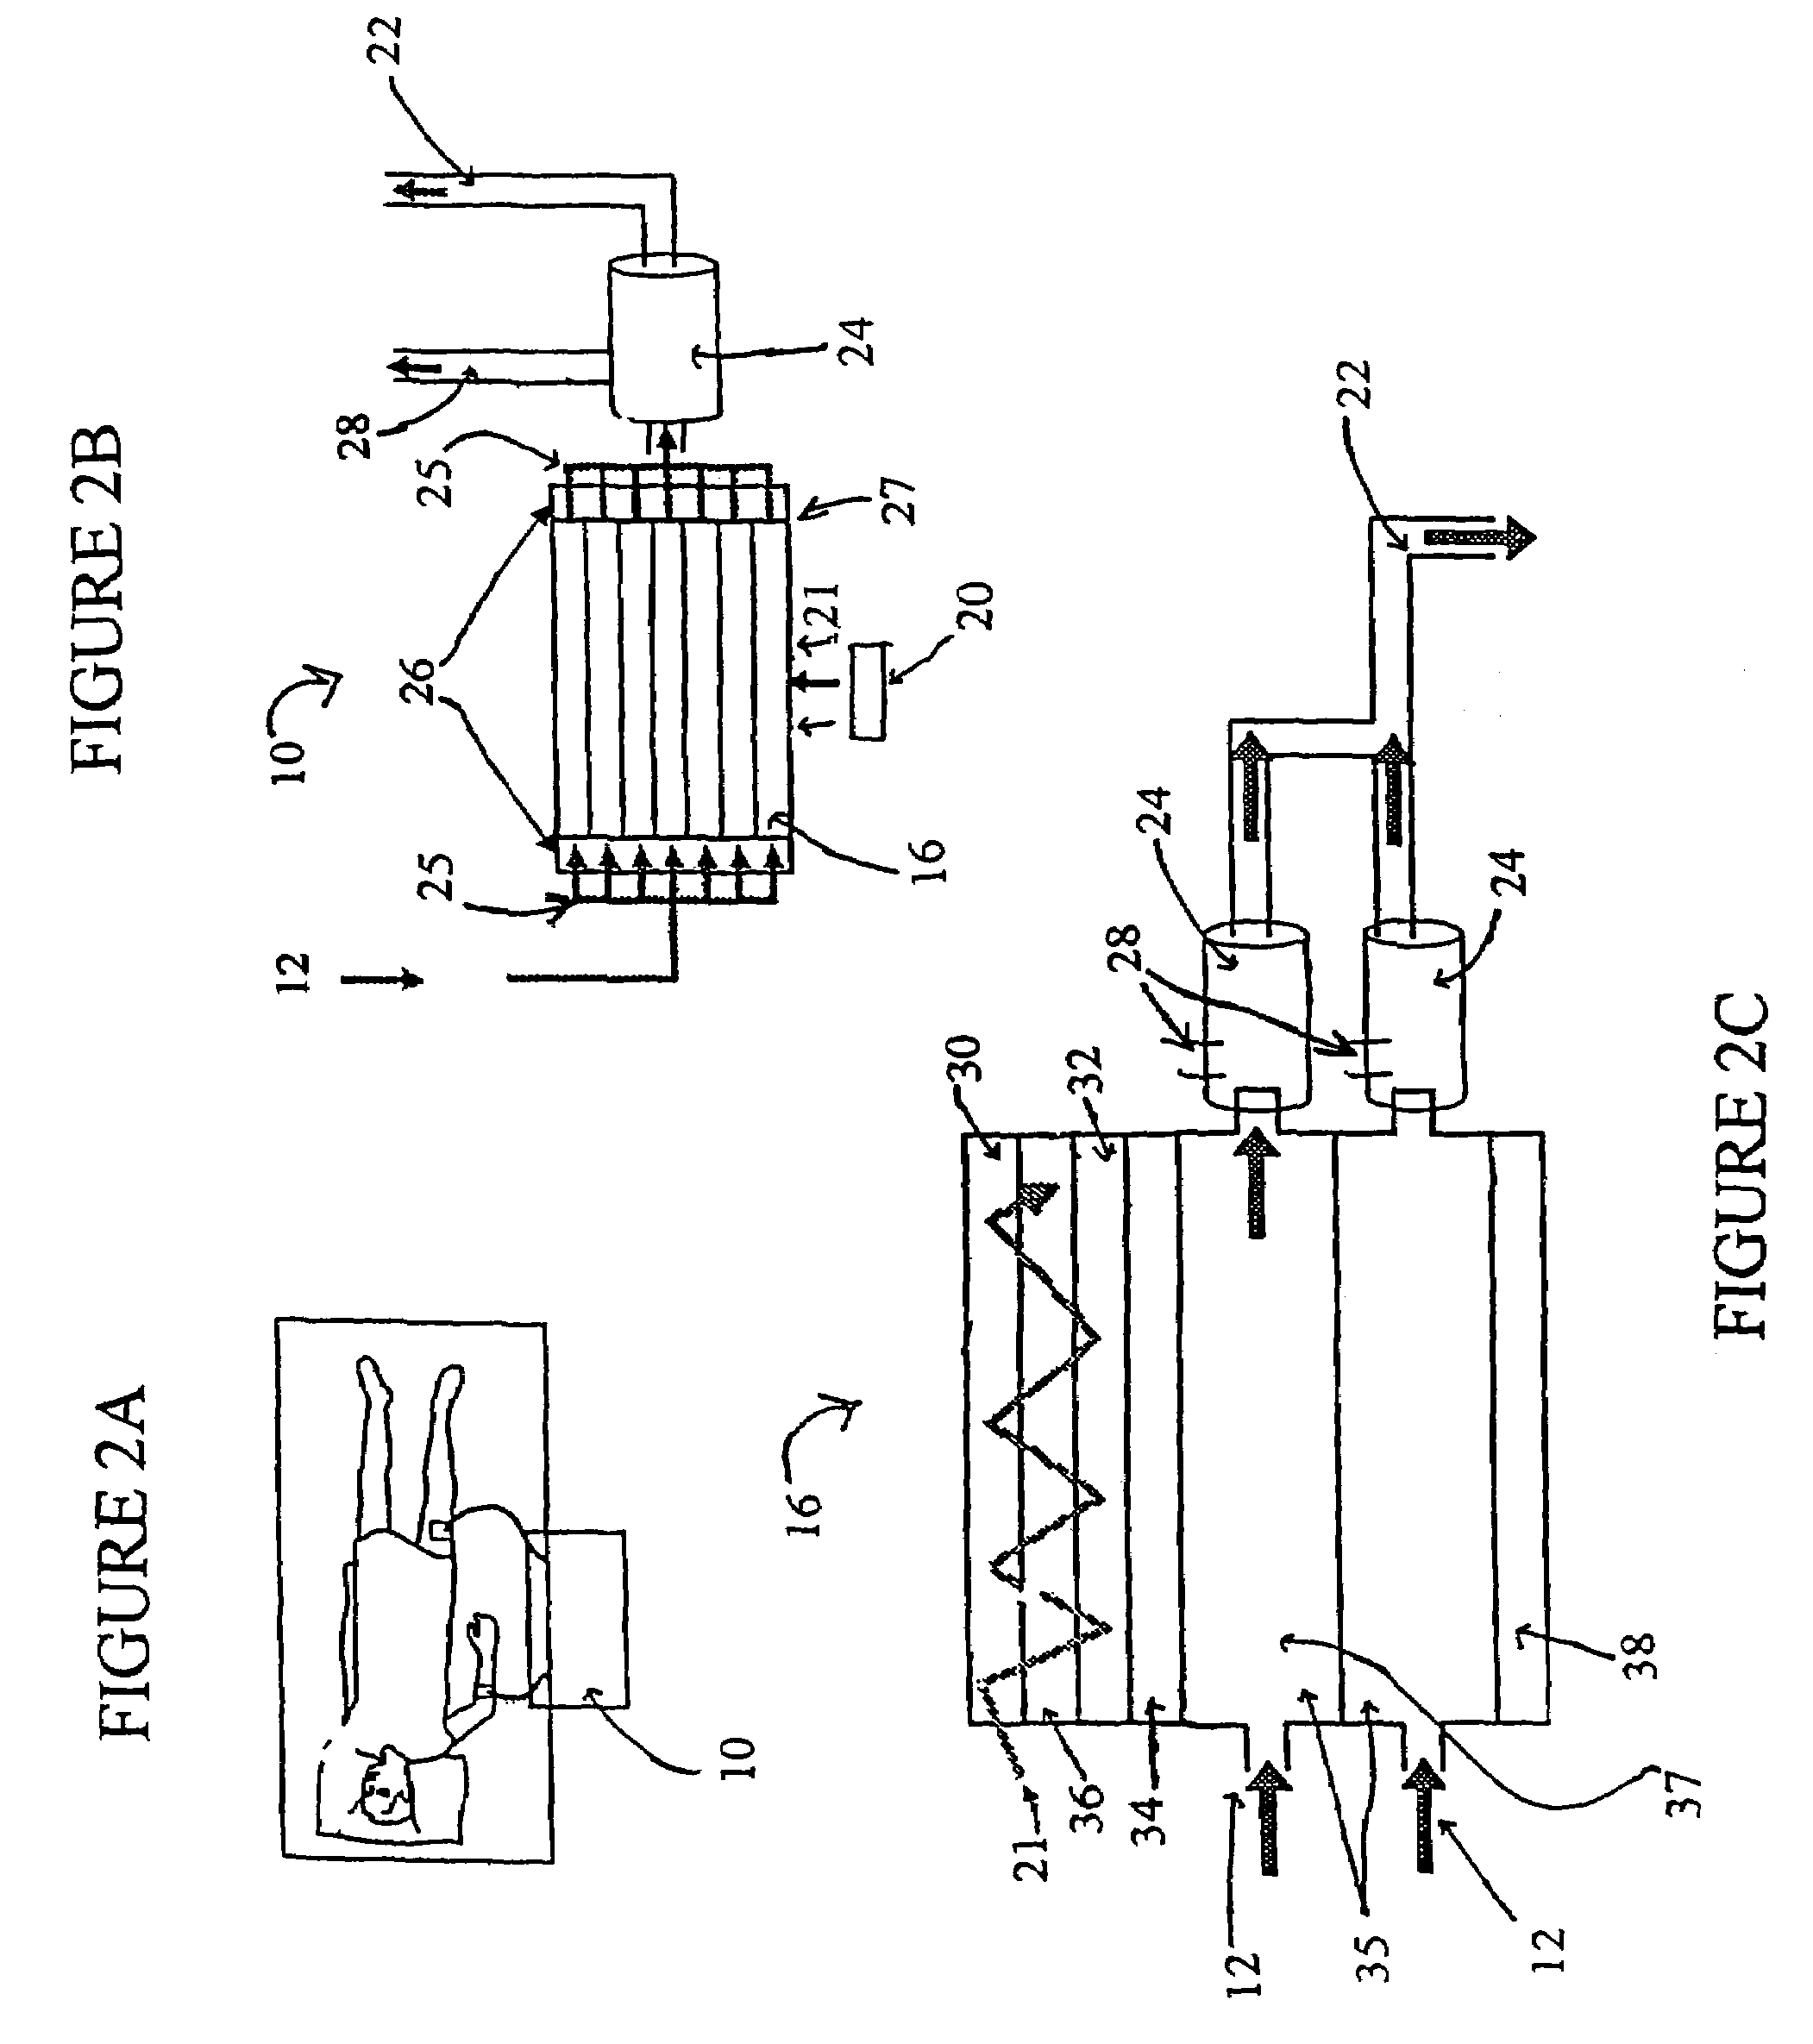 Photolytic cell for providing physiological gas exchange